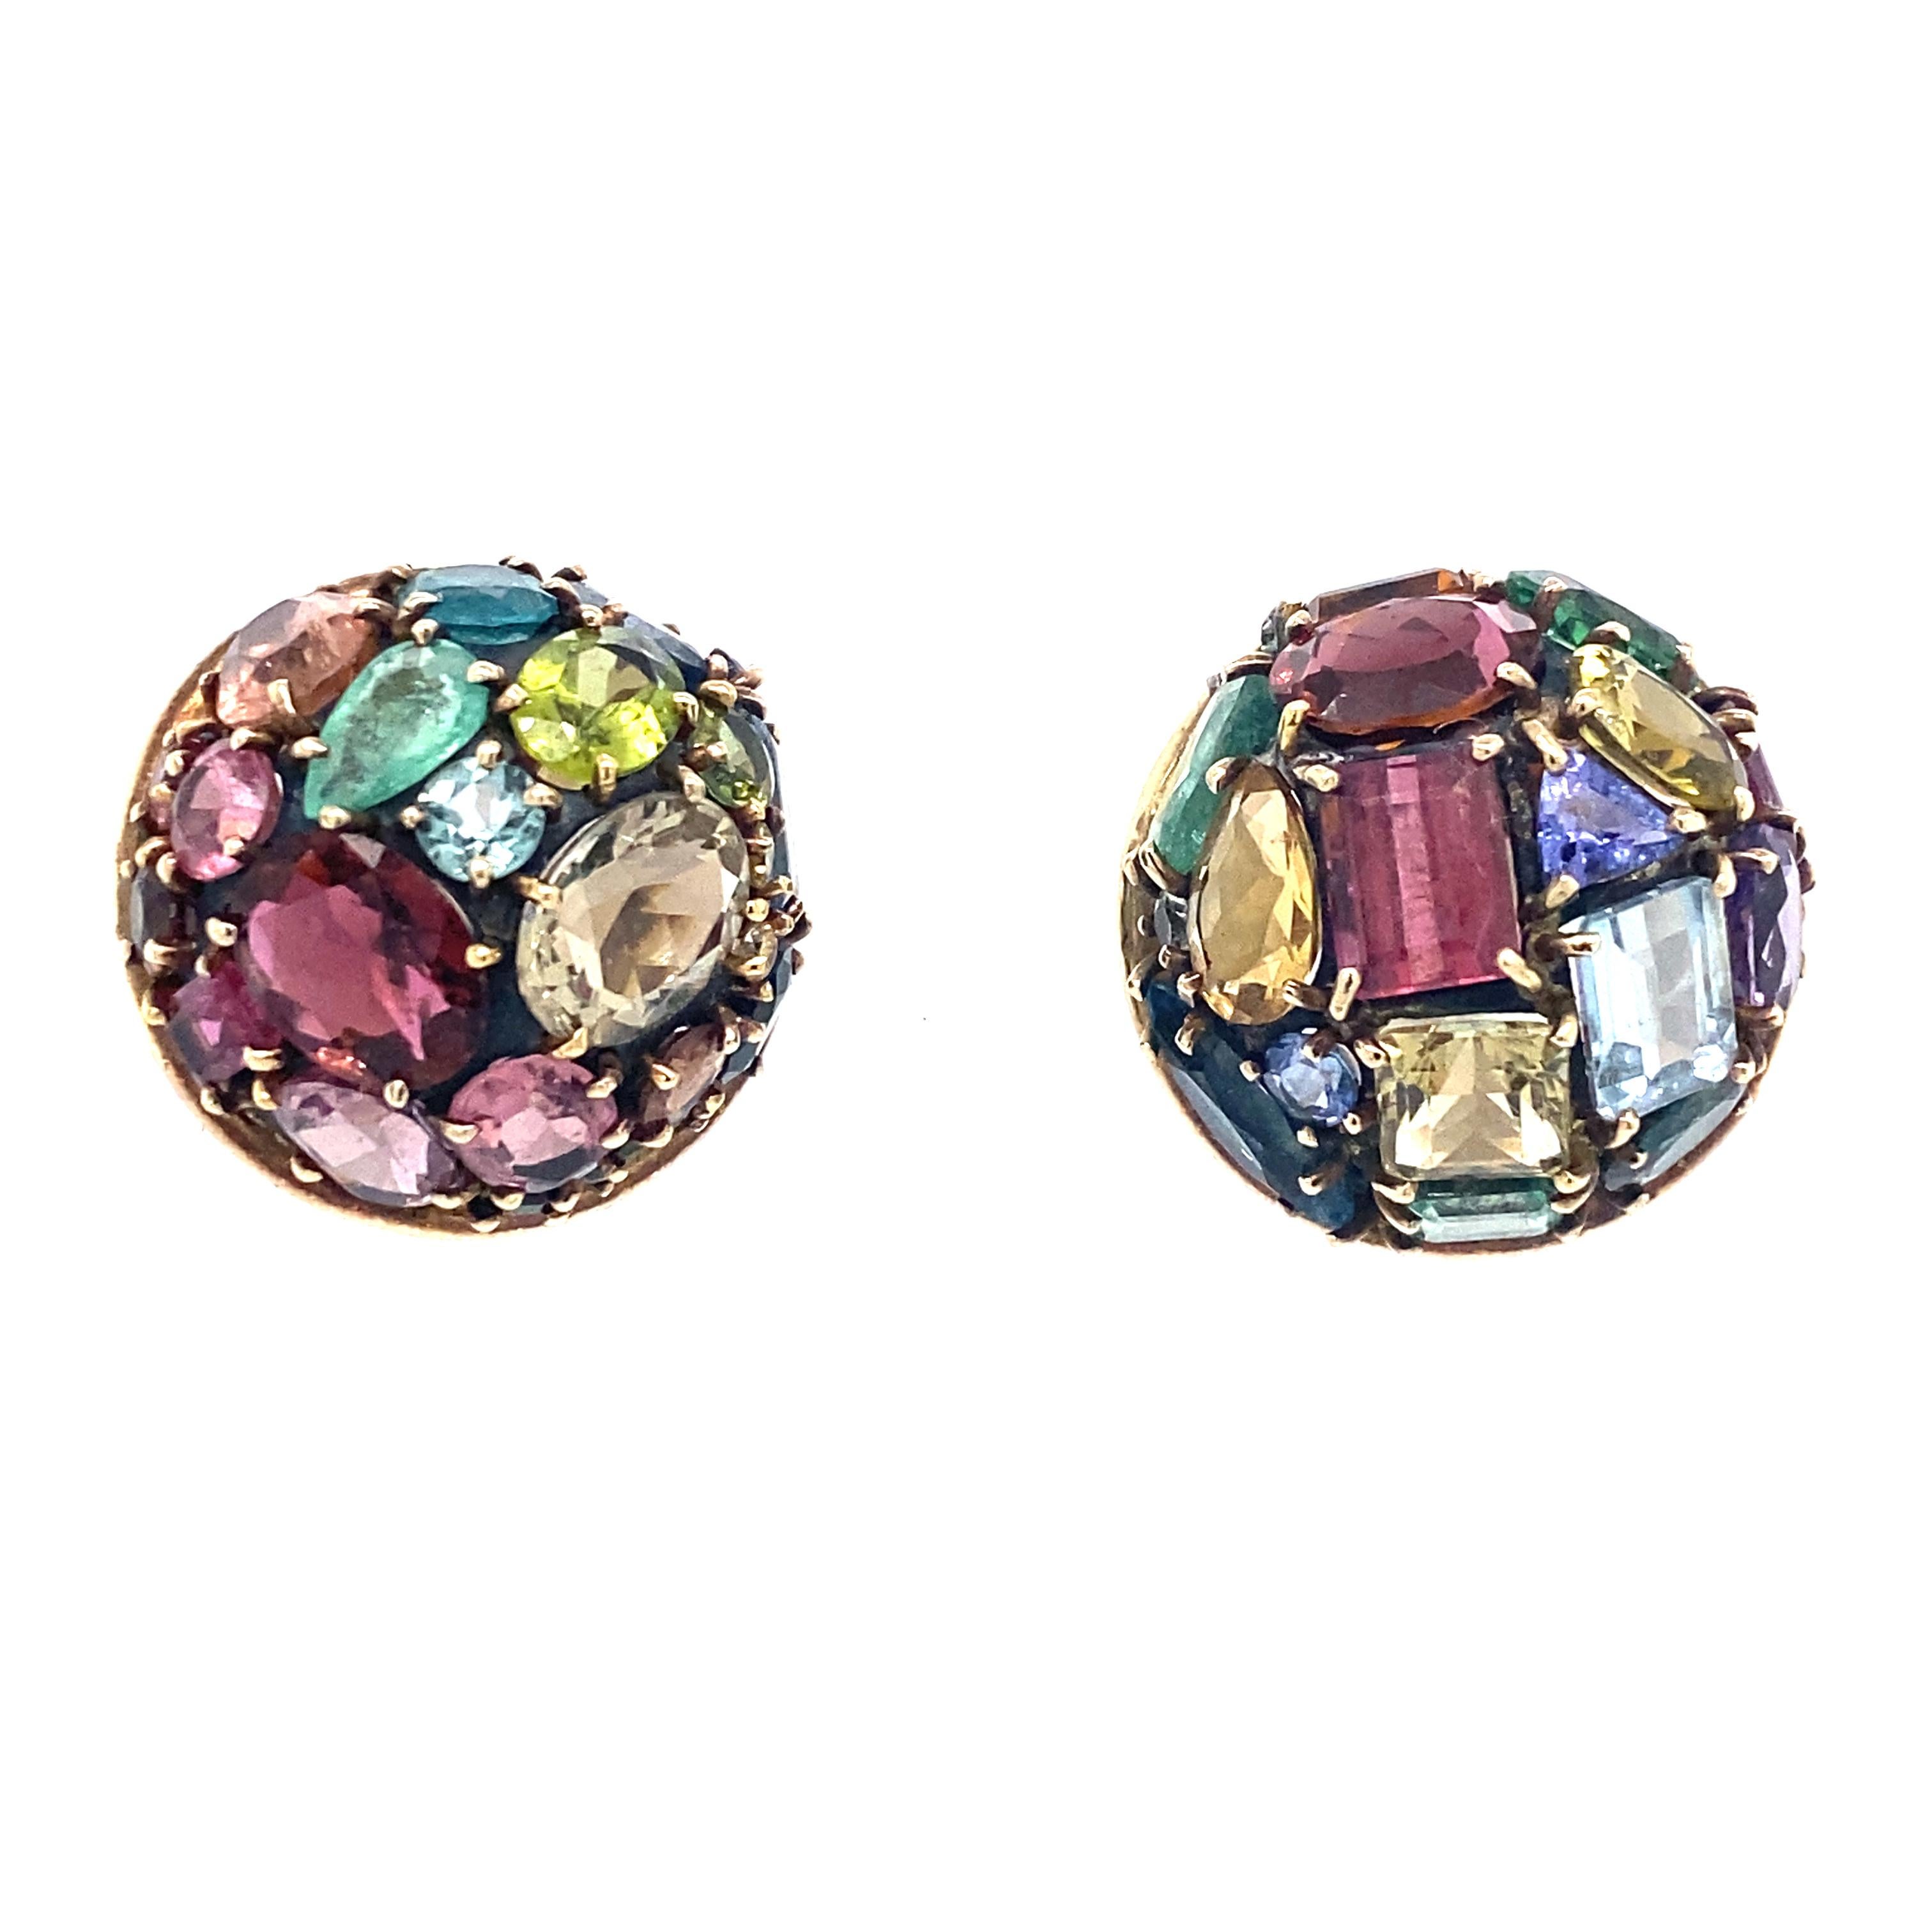 Marilyn Cooperman Gem Set Earrings  18k yellow gold/sterling silver, The earrings contains various cuts of amethysts, citrines, tourmalines, aquamarines, peridots and emeralds weighing approximately 25 carats in total, stamped 